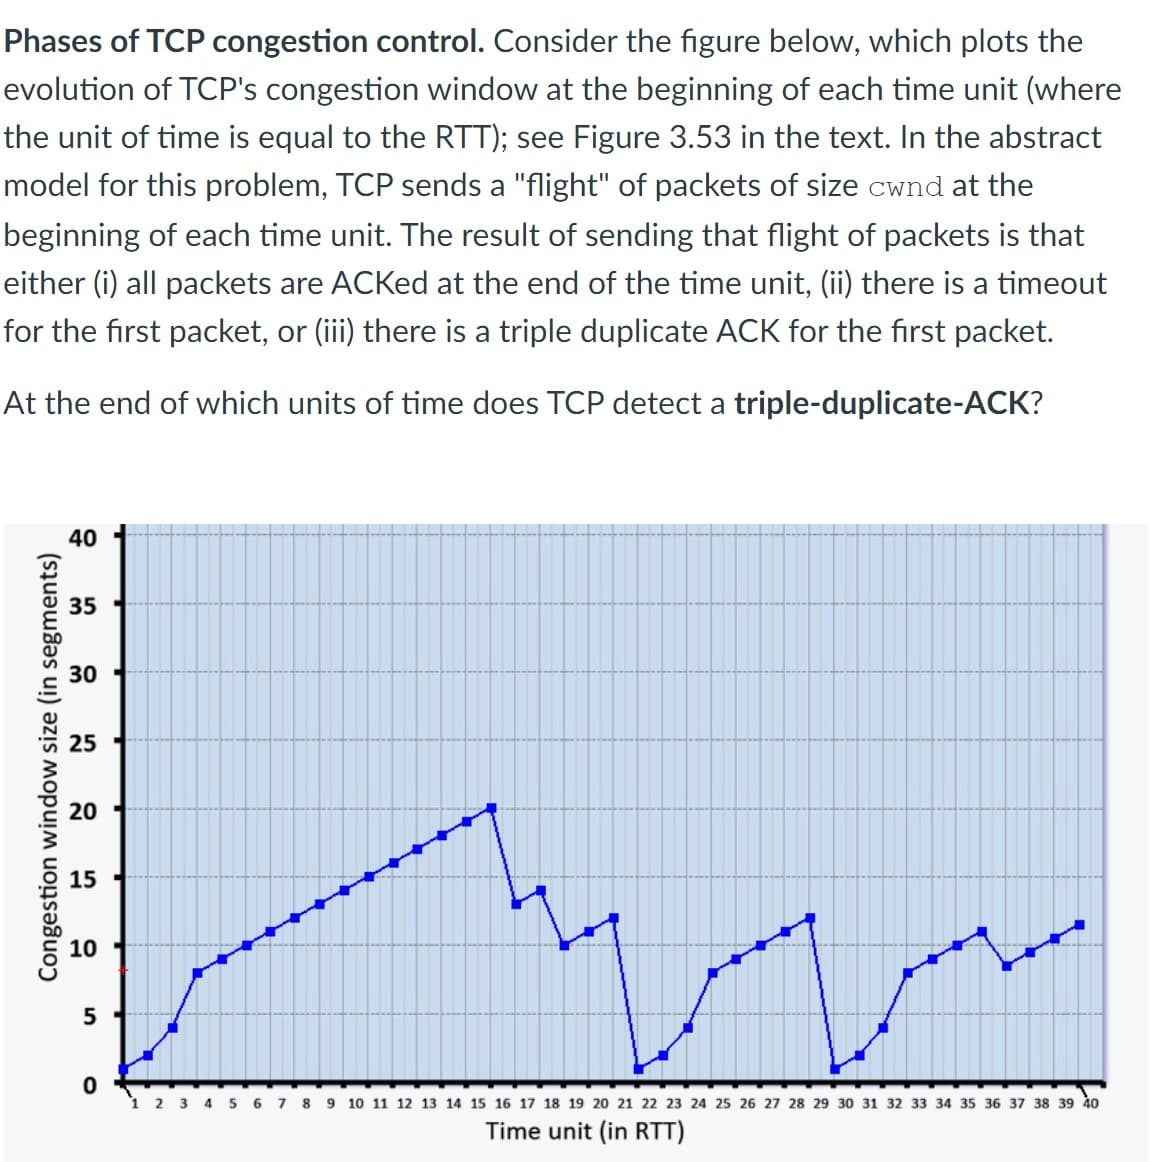 Phases of TCP congestion control. Consider the figure below, which plots the
evolution of TCP's congestion window at the beginning of each time unit (where
the unit of time is equal to the RTT); see Figure 3.53 in the text. In the abstract
model for this problem, TCP sends a "flight" of packets of size cwnd at the
beginning of each time unit. The result of sending that flight of packets is that
either (i) all packets are ACKed at the end of the time unit, (ii) there is a timeout
for the first packet, or (iii) there is a triple duplicate ACK for the first packet.
At the end of which units of time does TCP detect a triple-duplicate-ACK?
Congestion window size (in segments)
40
35
25
20
10
5
0
1 2 3 4 5 6 7 8 9 10 11 12 13 14 15 16 17 18 19 20 21 22 23 24 25 26 27 28 29 30 31 32 33 34 35 36 37 38 39 40
Time unit (in RTT)